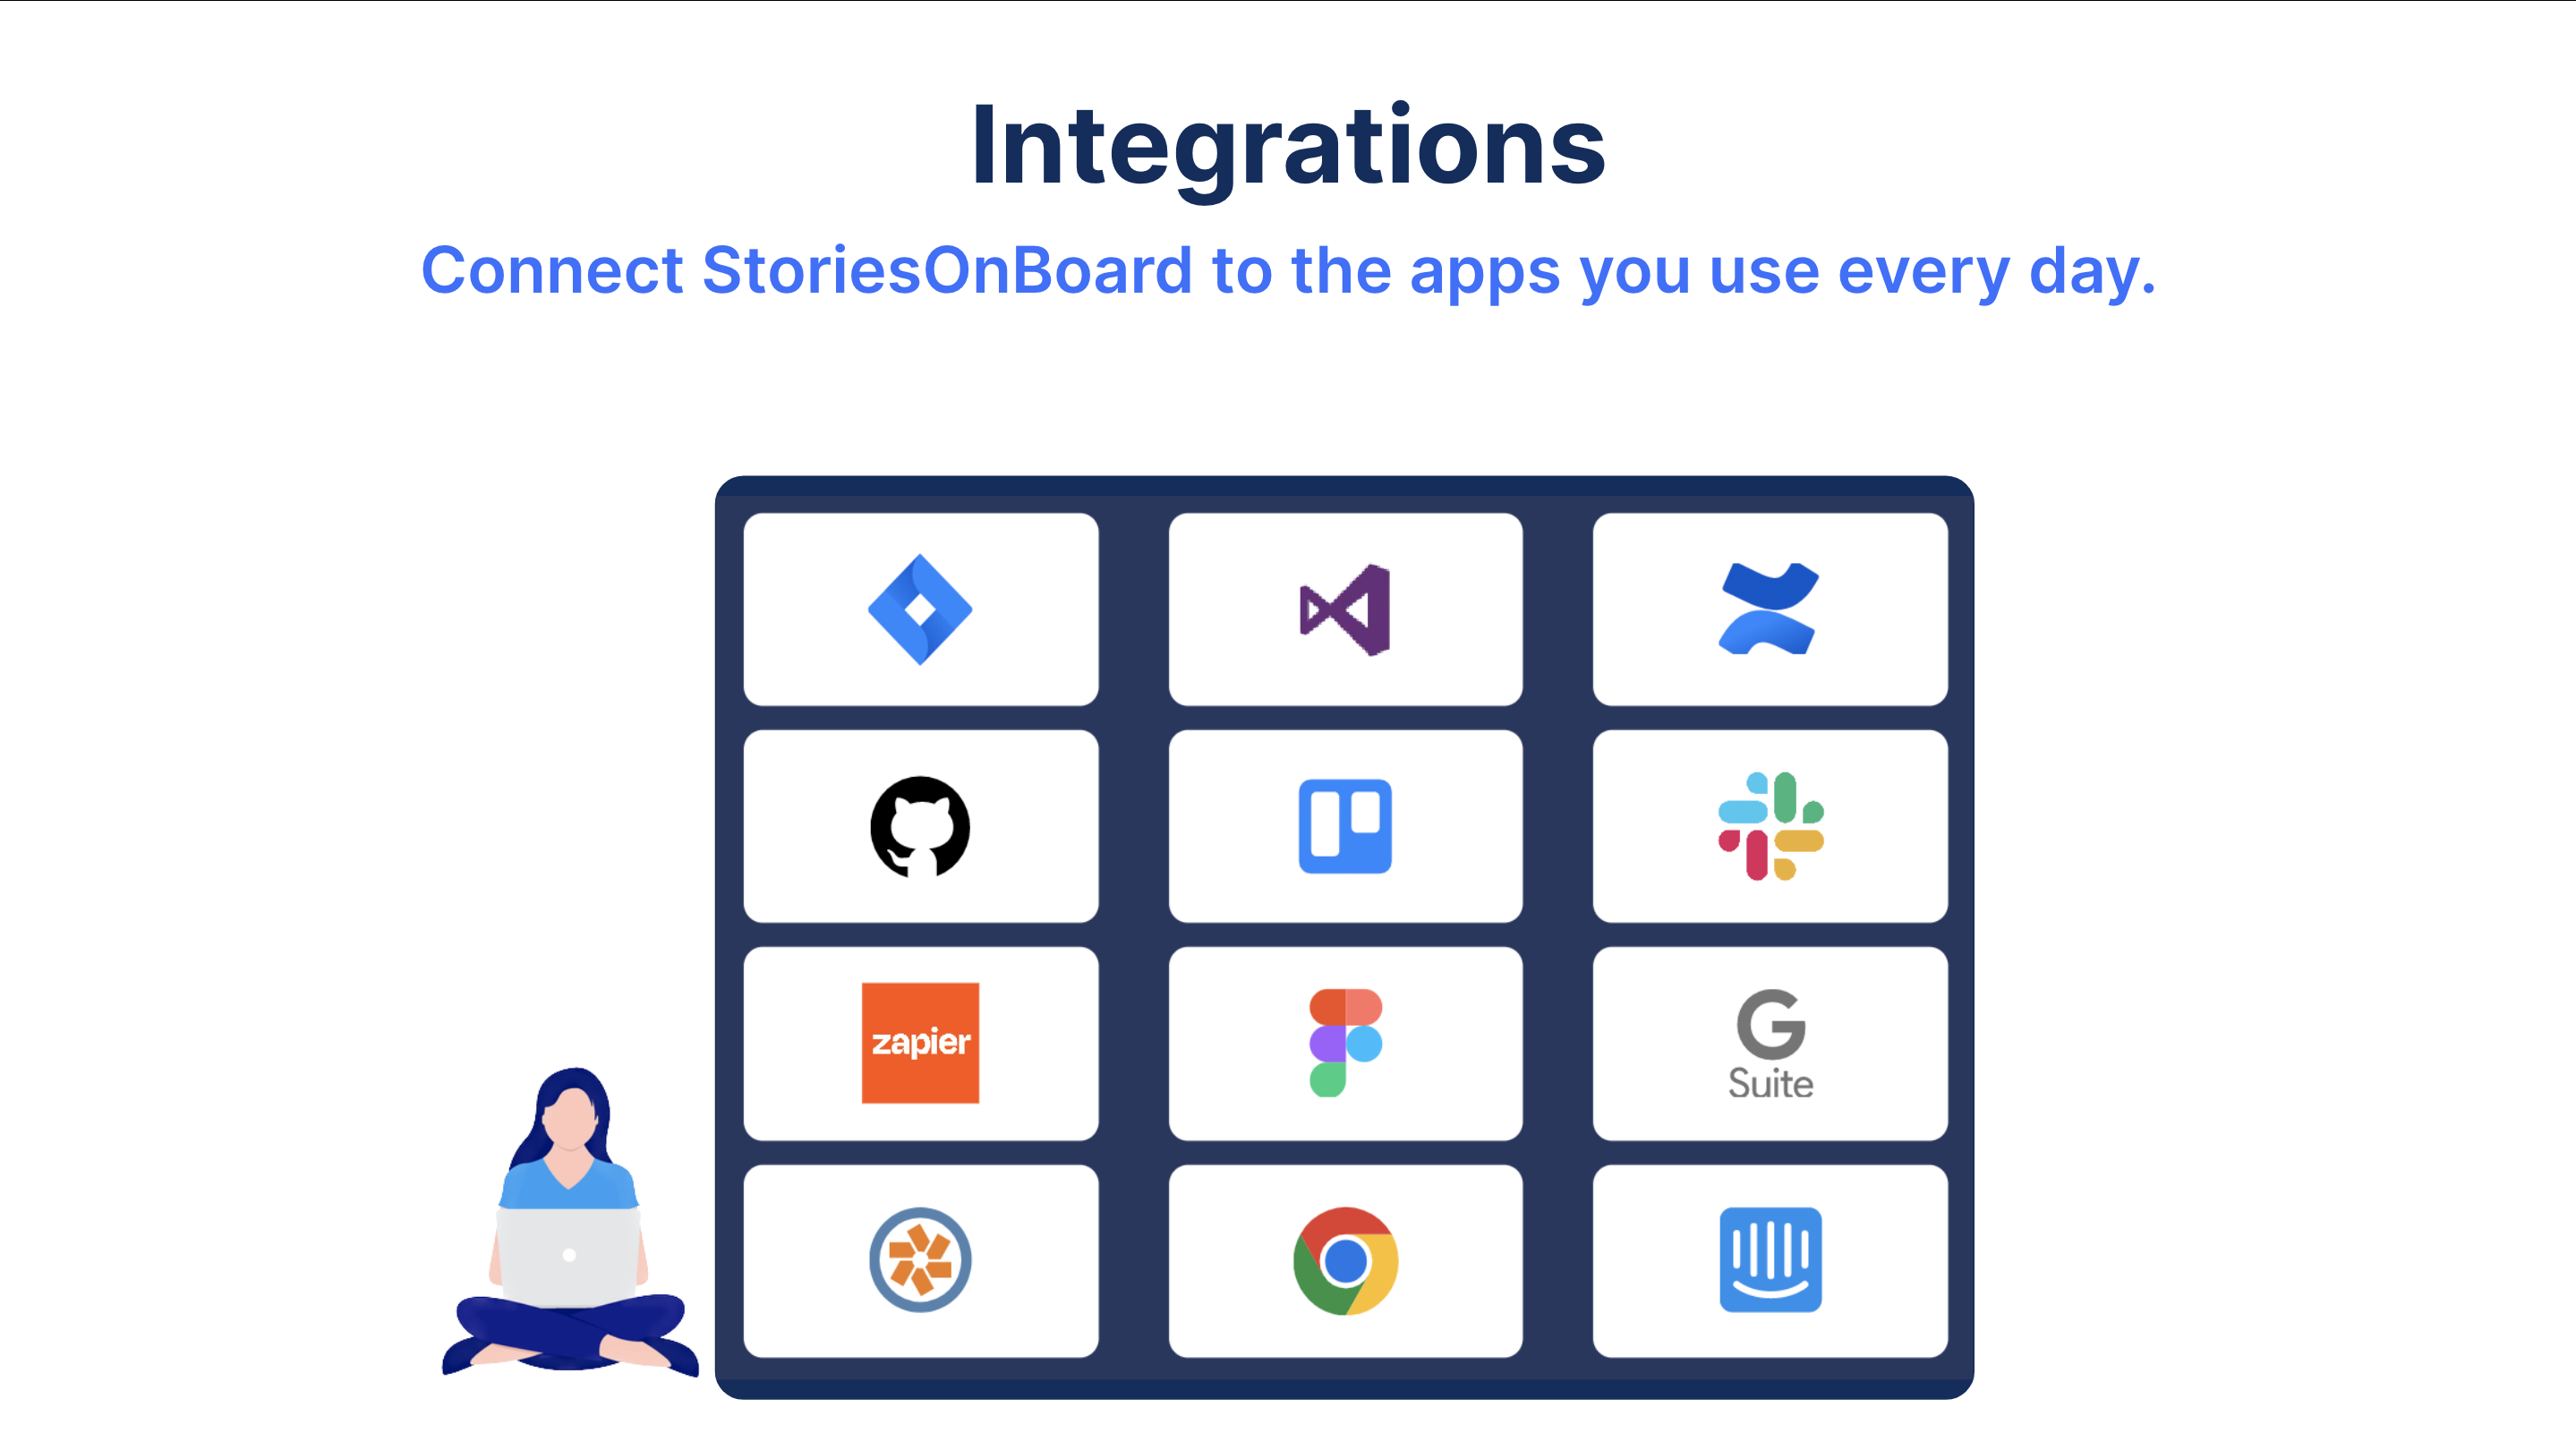 Make project management workflows effortless by connecting StoriesOnBoard to your tools.